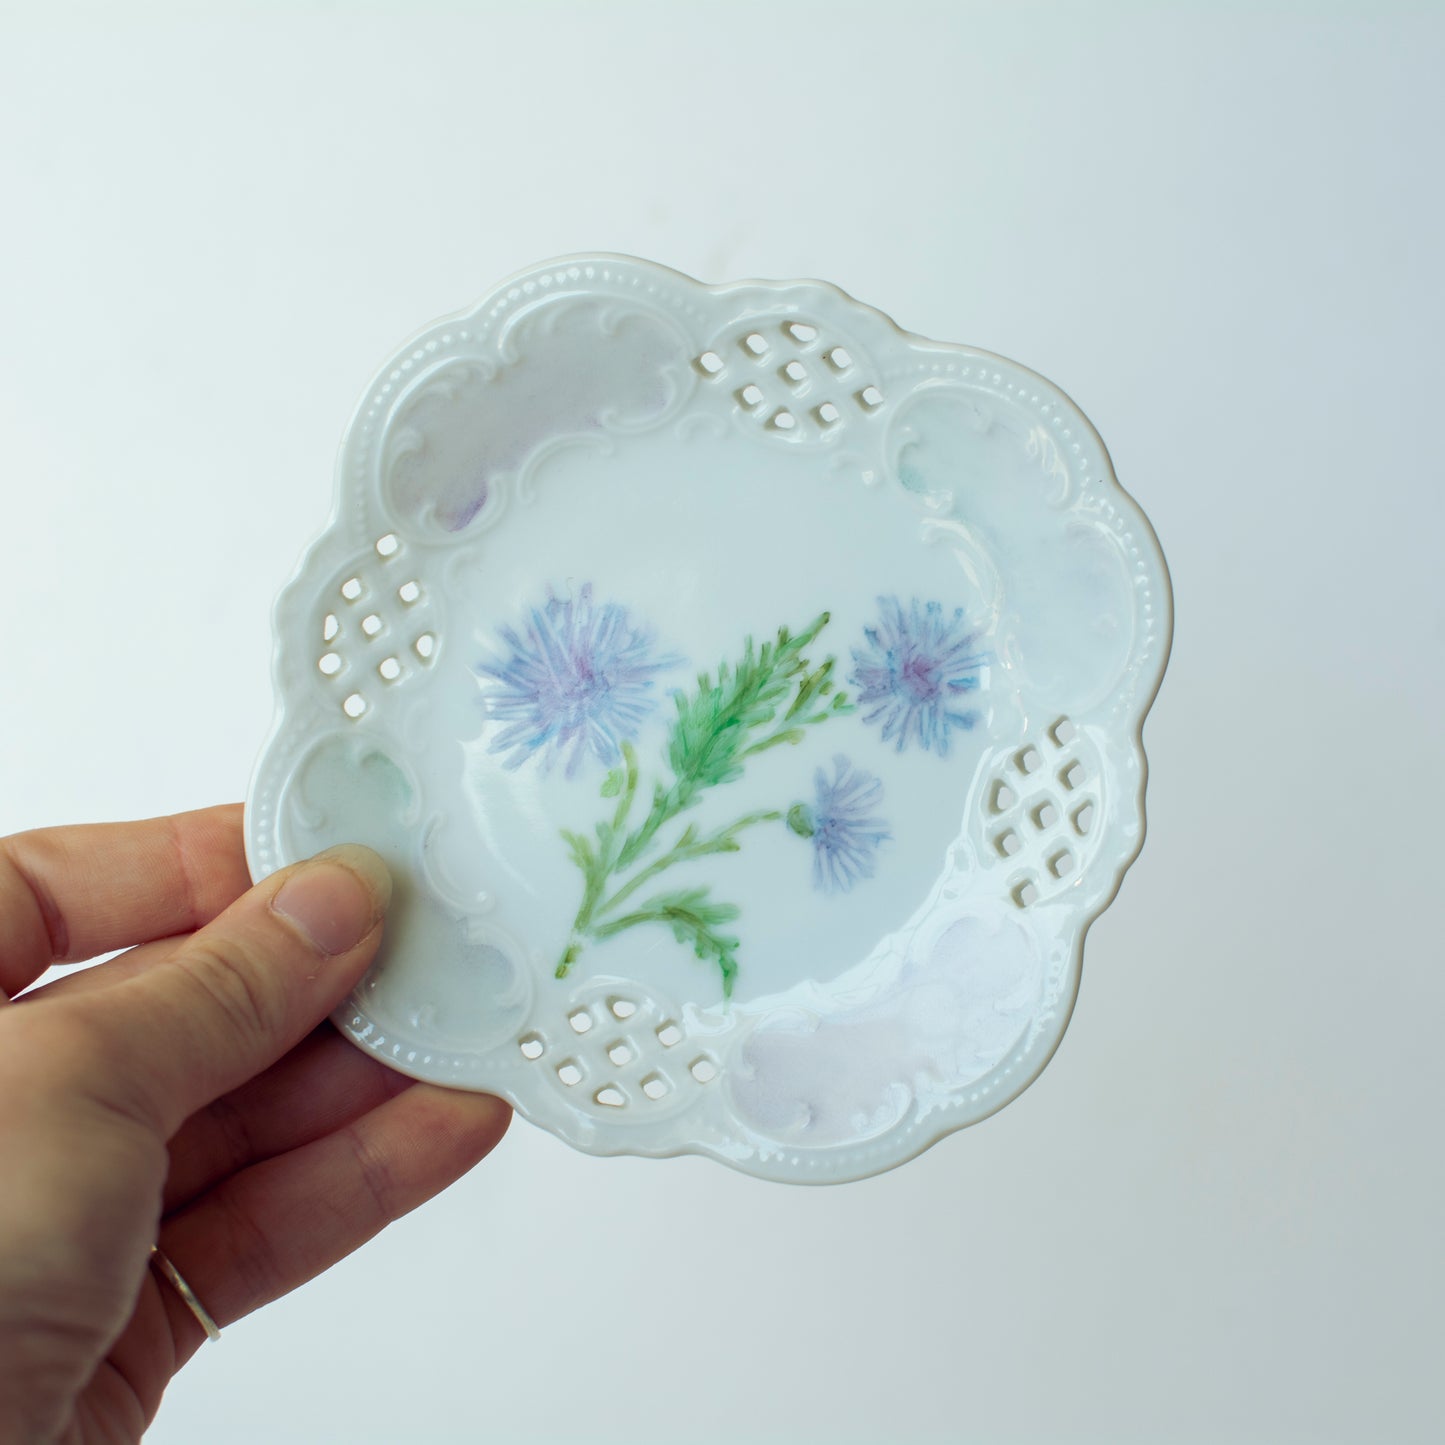 Vintage Floral Jewelry trays